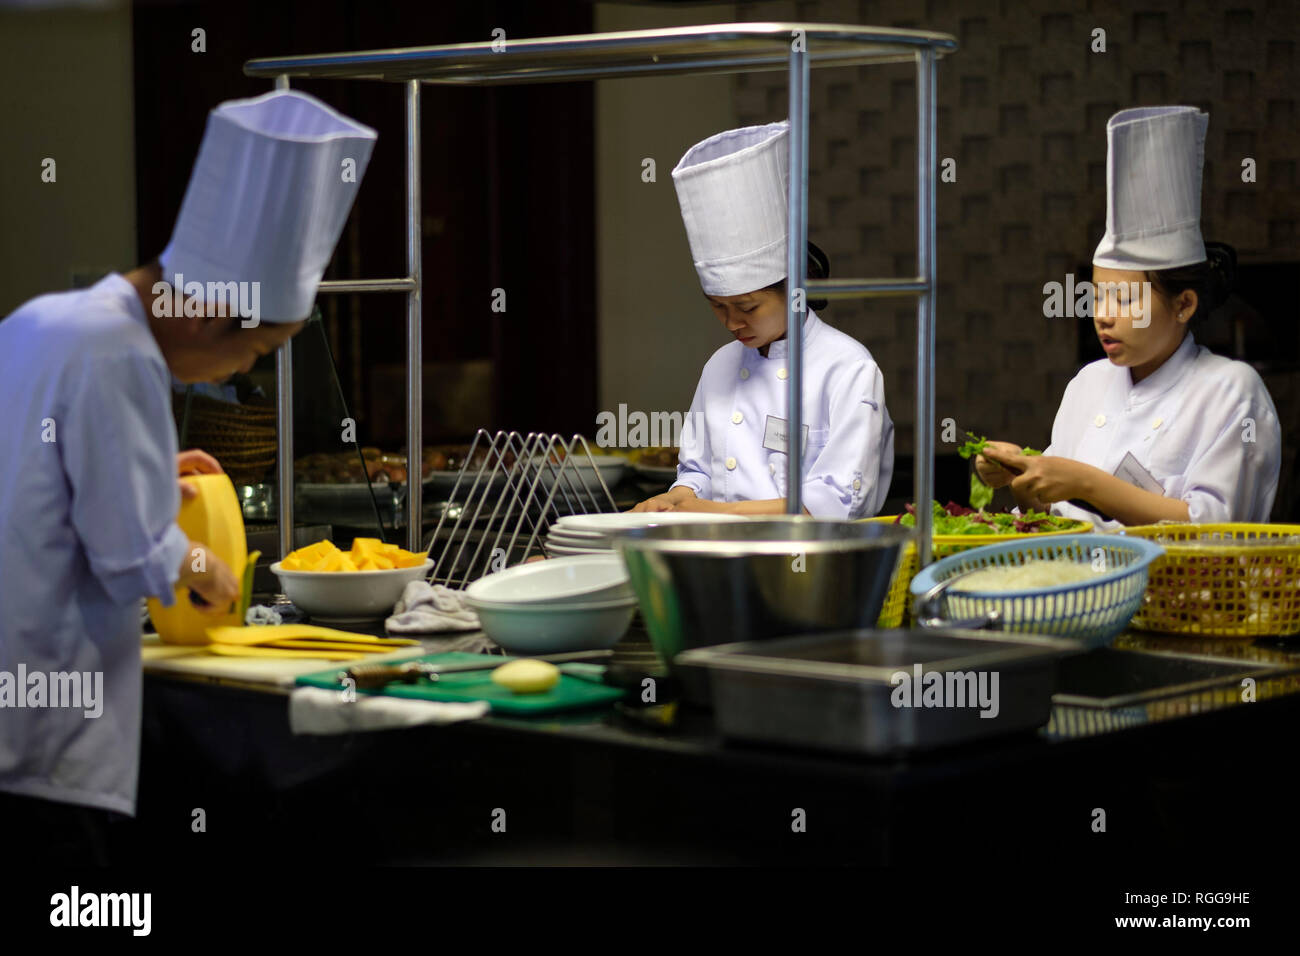 Cooks preparing food at a chinese restaurant Stock Photo